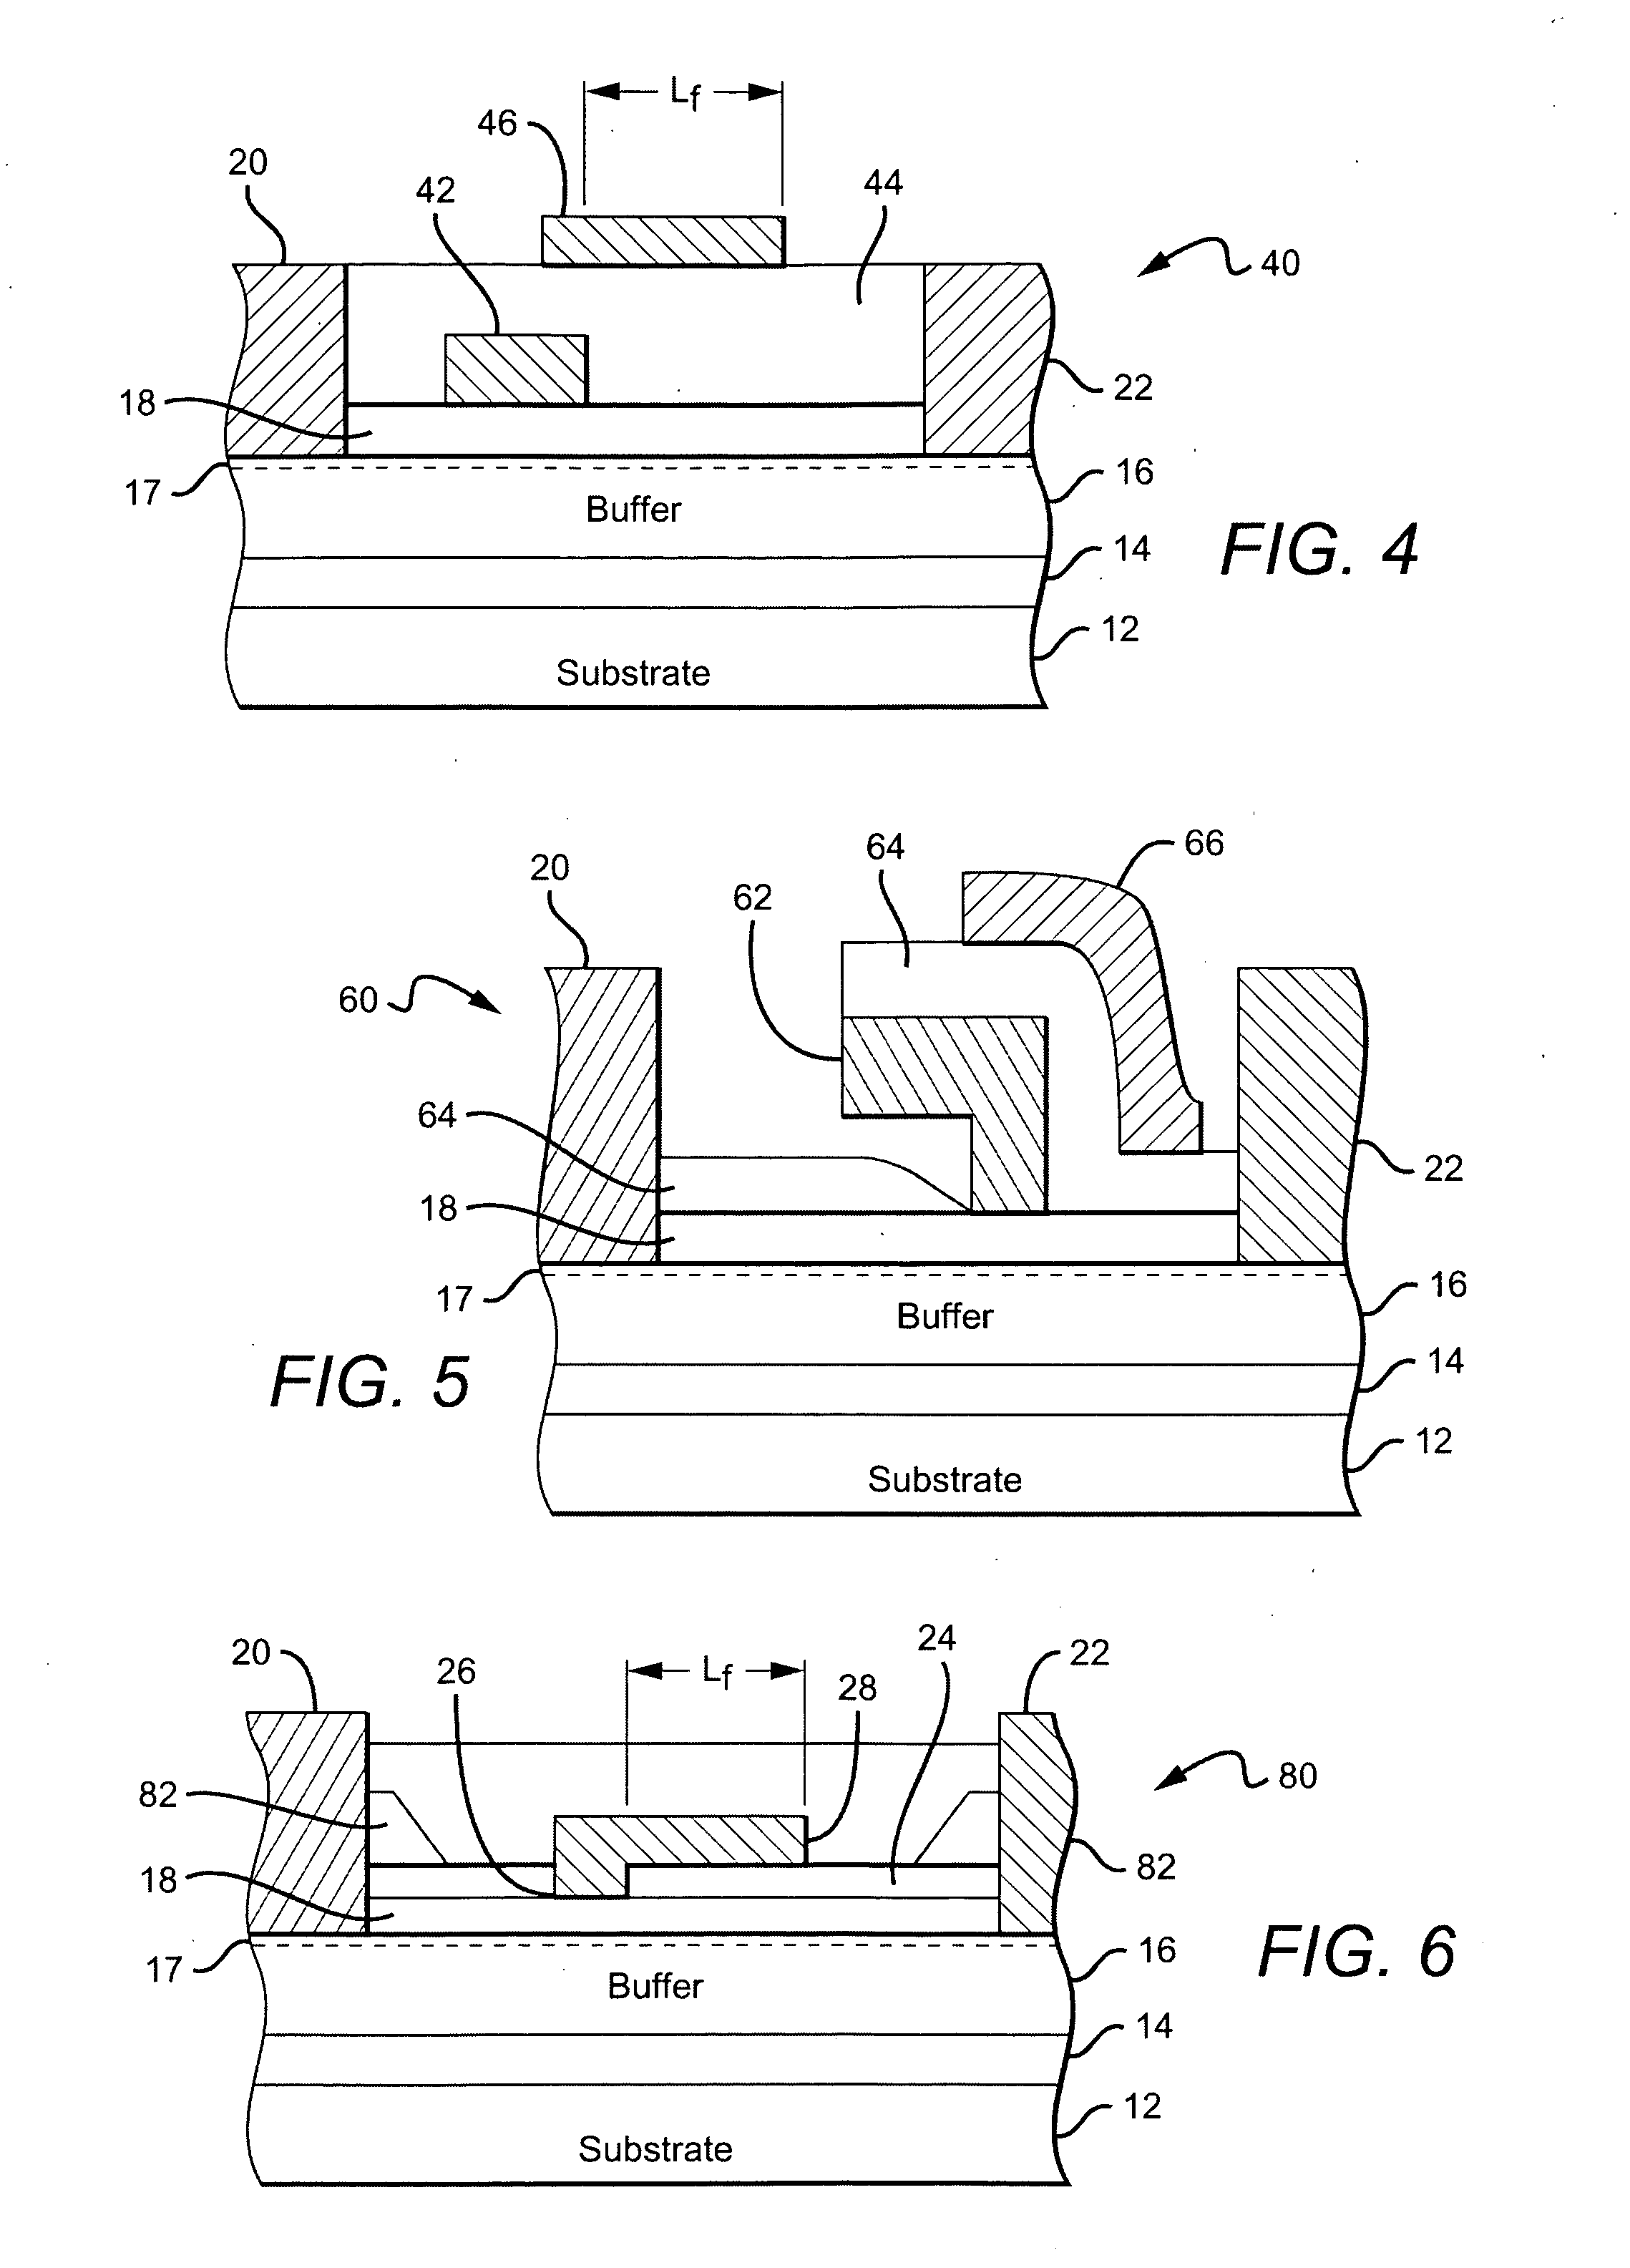 Wide bandgap transistor devices with field plates